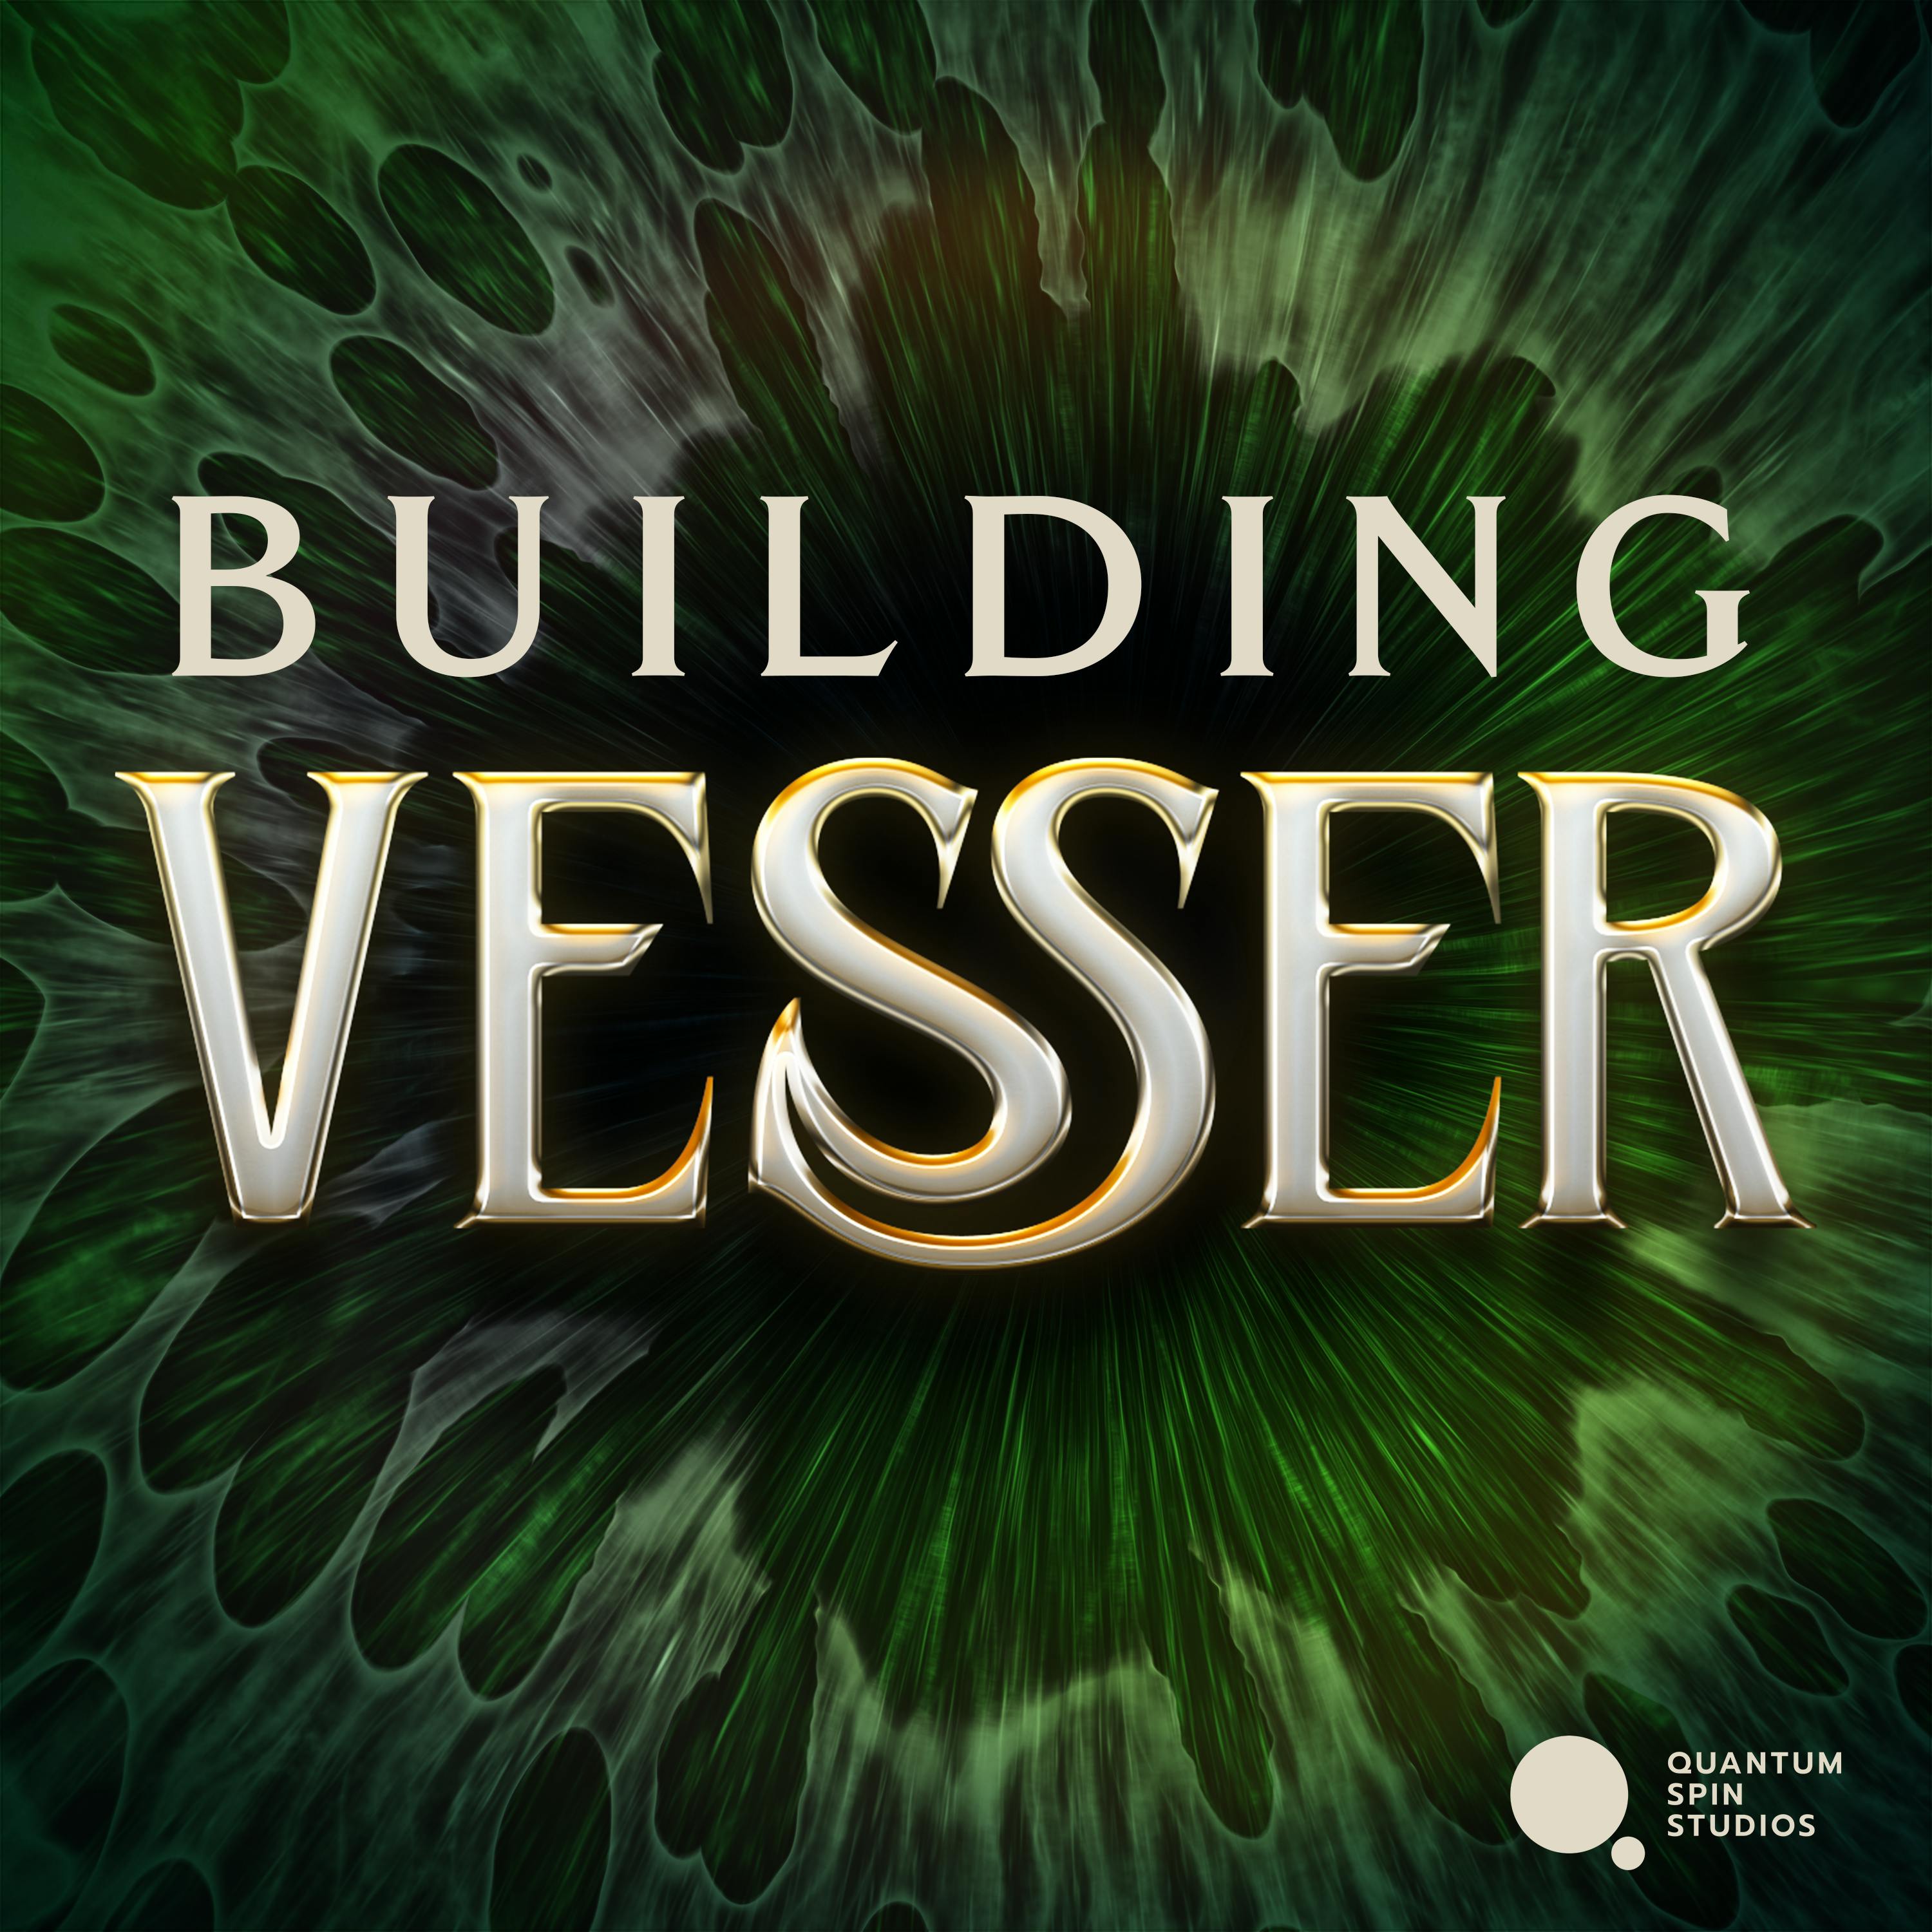 Building Vesser: Baby's First Magic